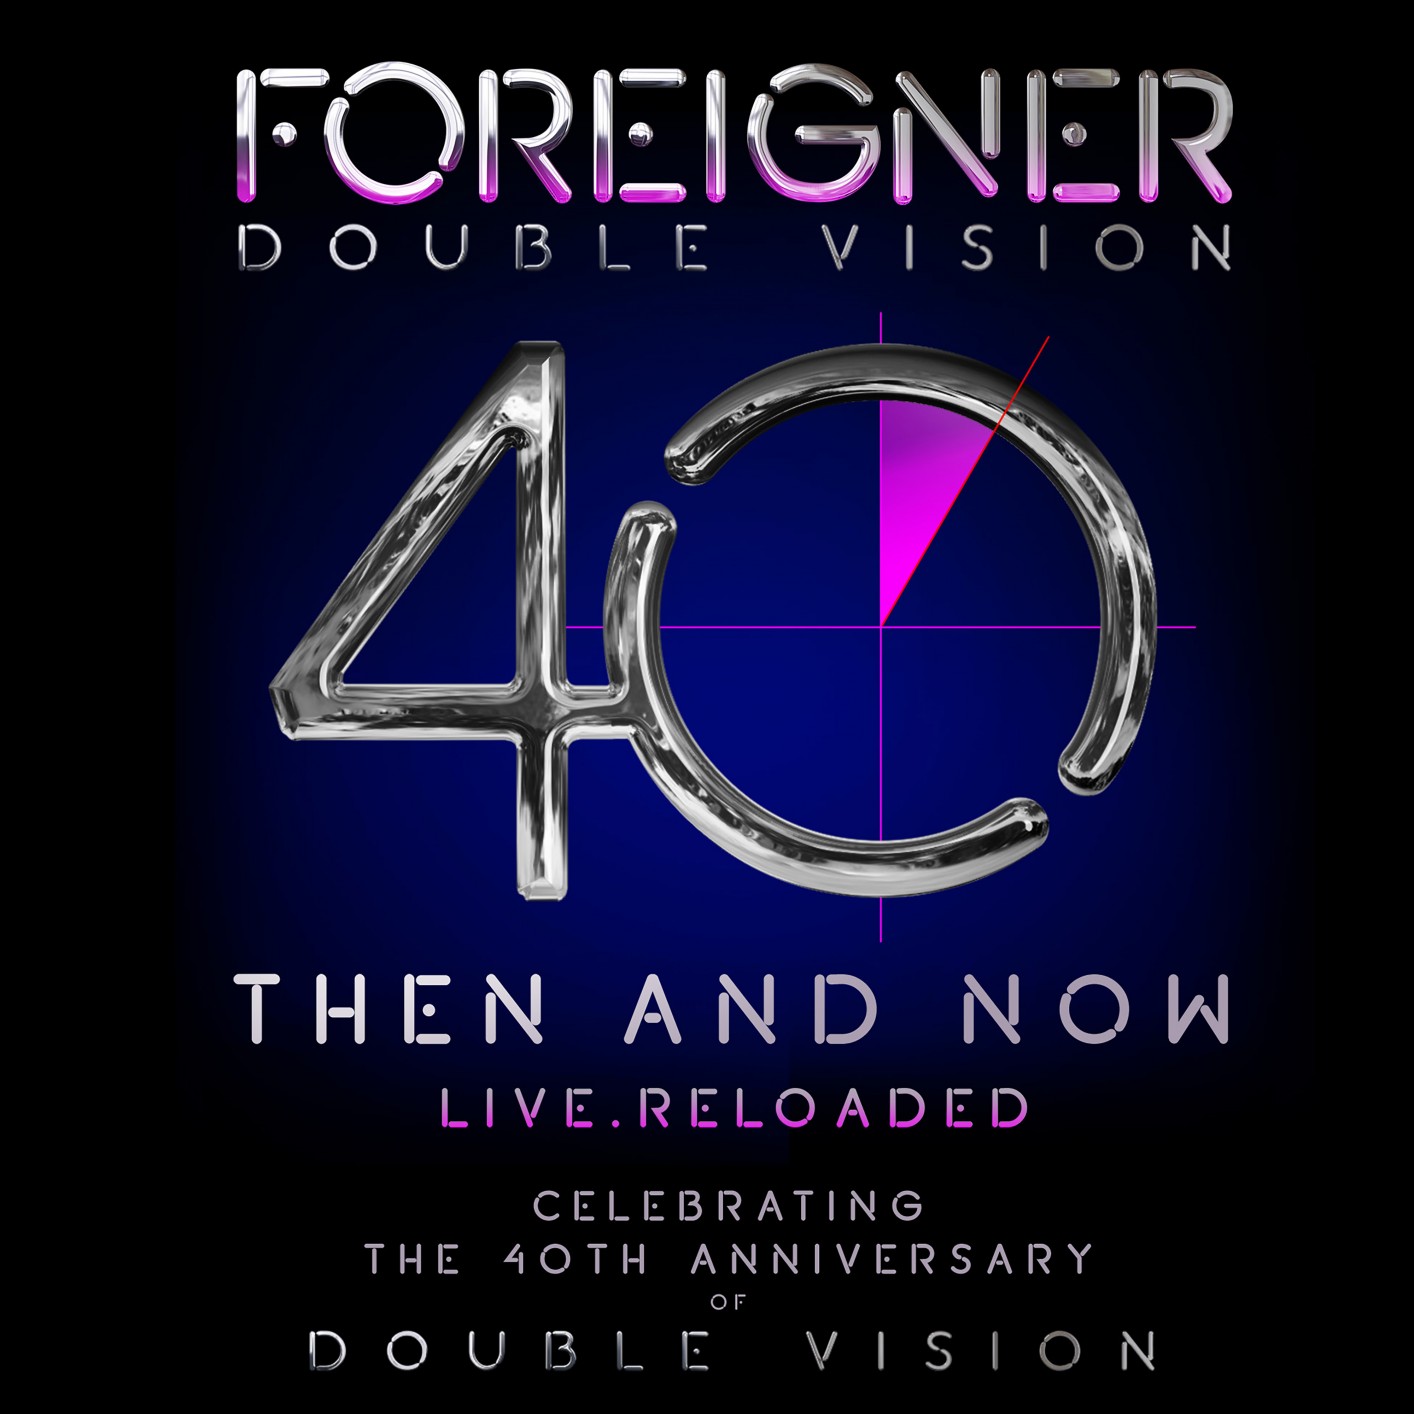 Foreigner - Double Vision: Then and Now (2019) [FLAC 24bit/96kHz]